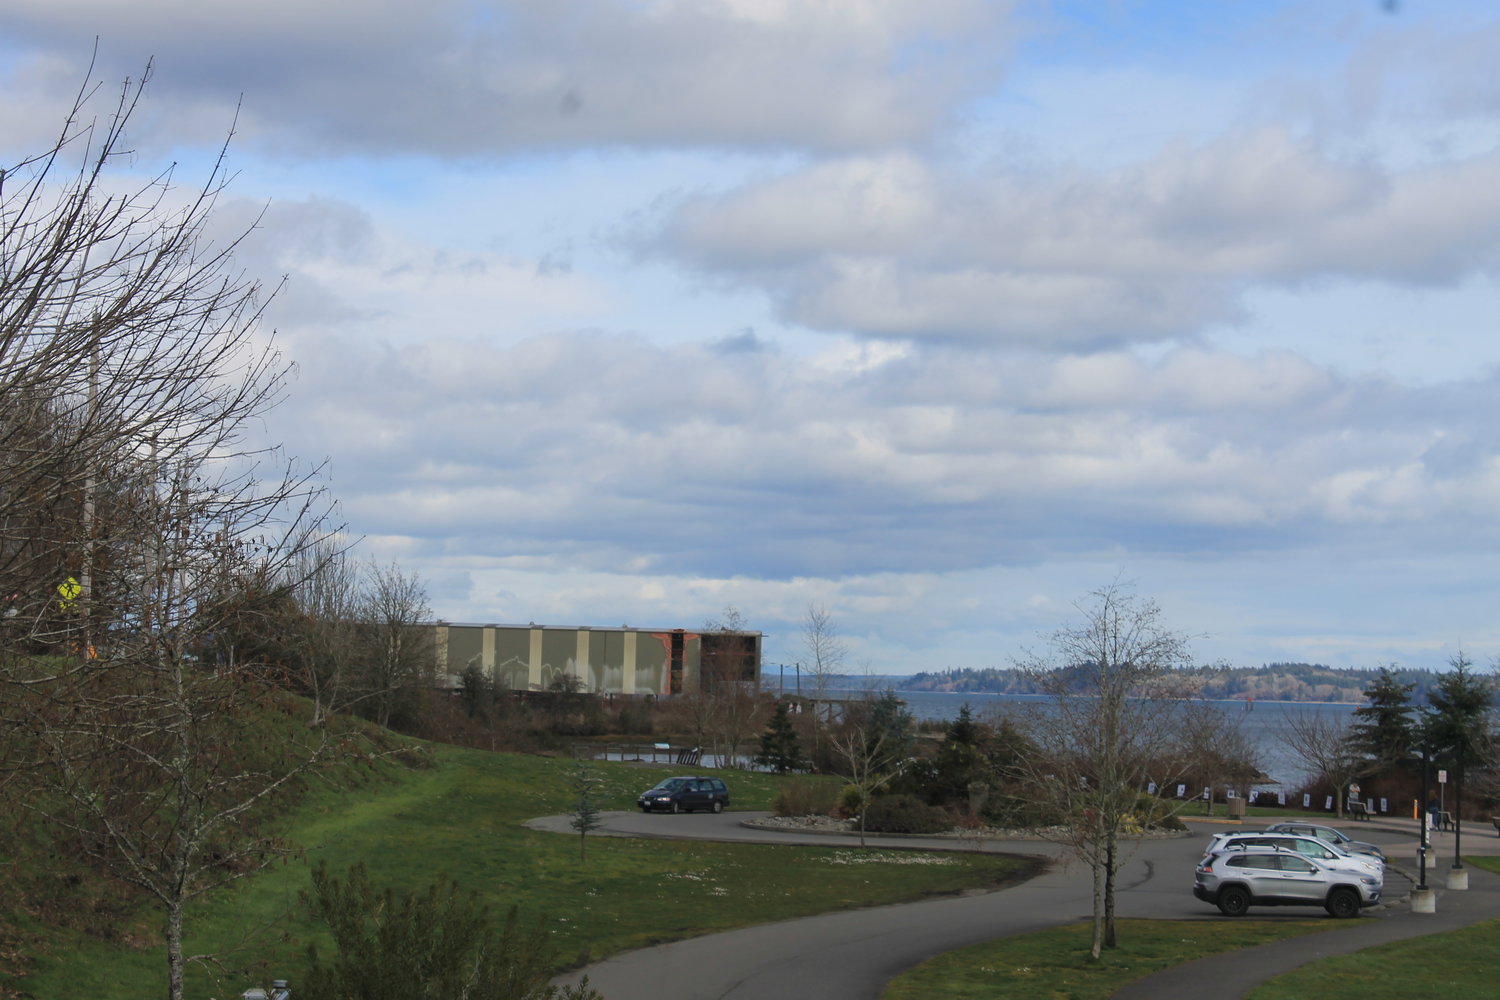 This is a north-facing view of the property on which a developer is proposing to construct five mixed-use buildings and parking. The location is on West Bay Drive in west Olympia. The park, partly shown in the photo, would not be affected by the new development other than to extend the walking path north.